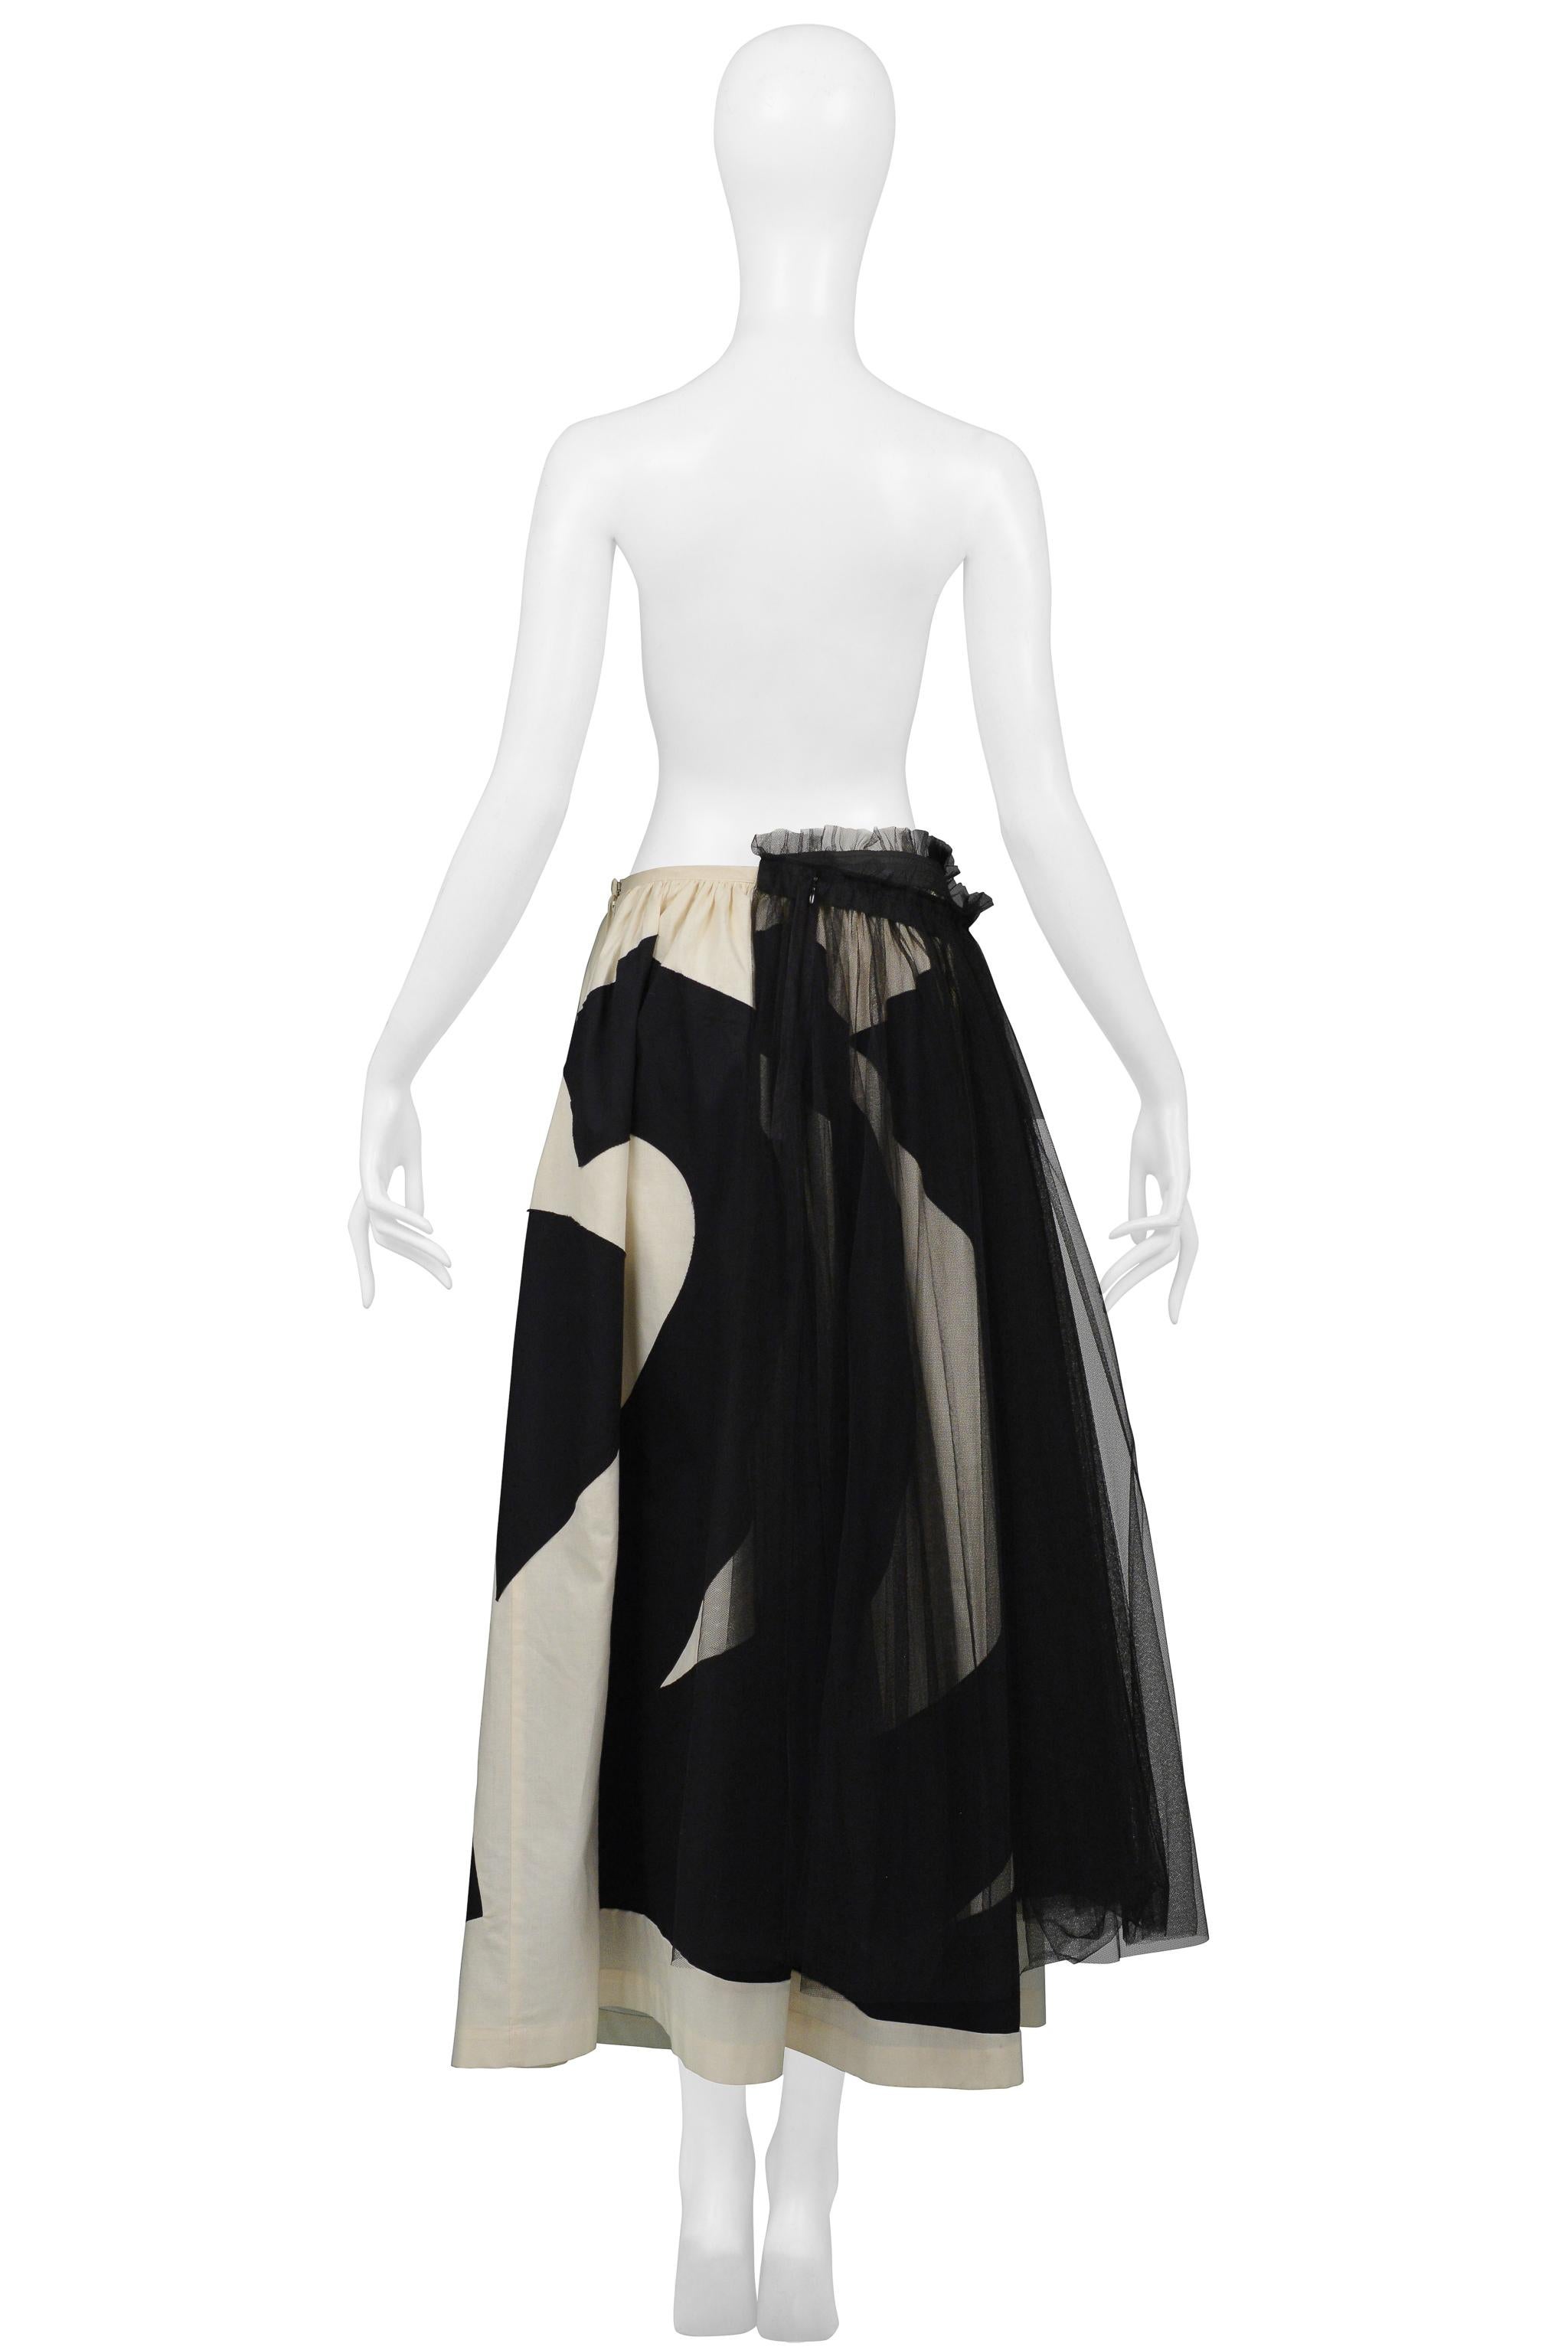 Comme Des Garcons Off-White & Black Abstract Skirt With Black Tulle 2002 For Sale 3